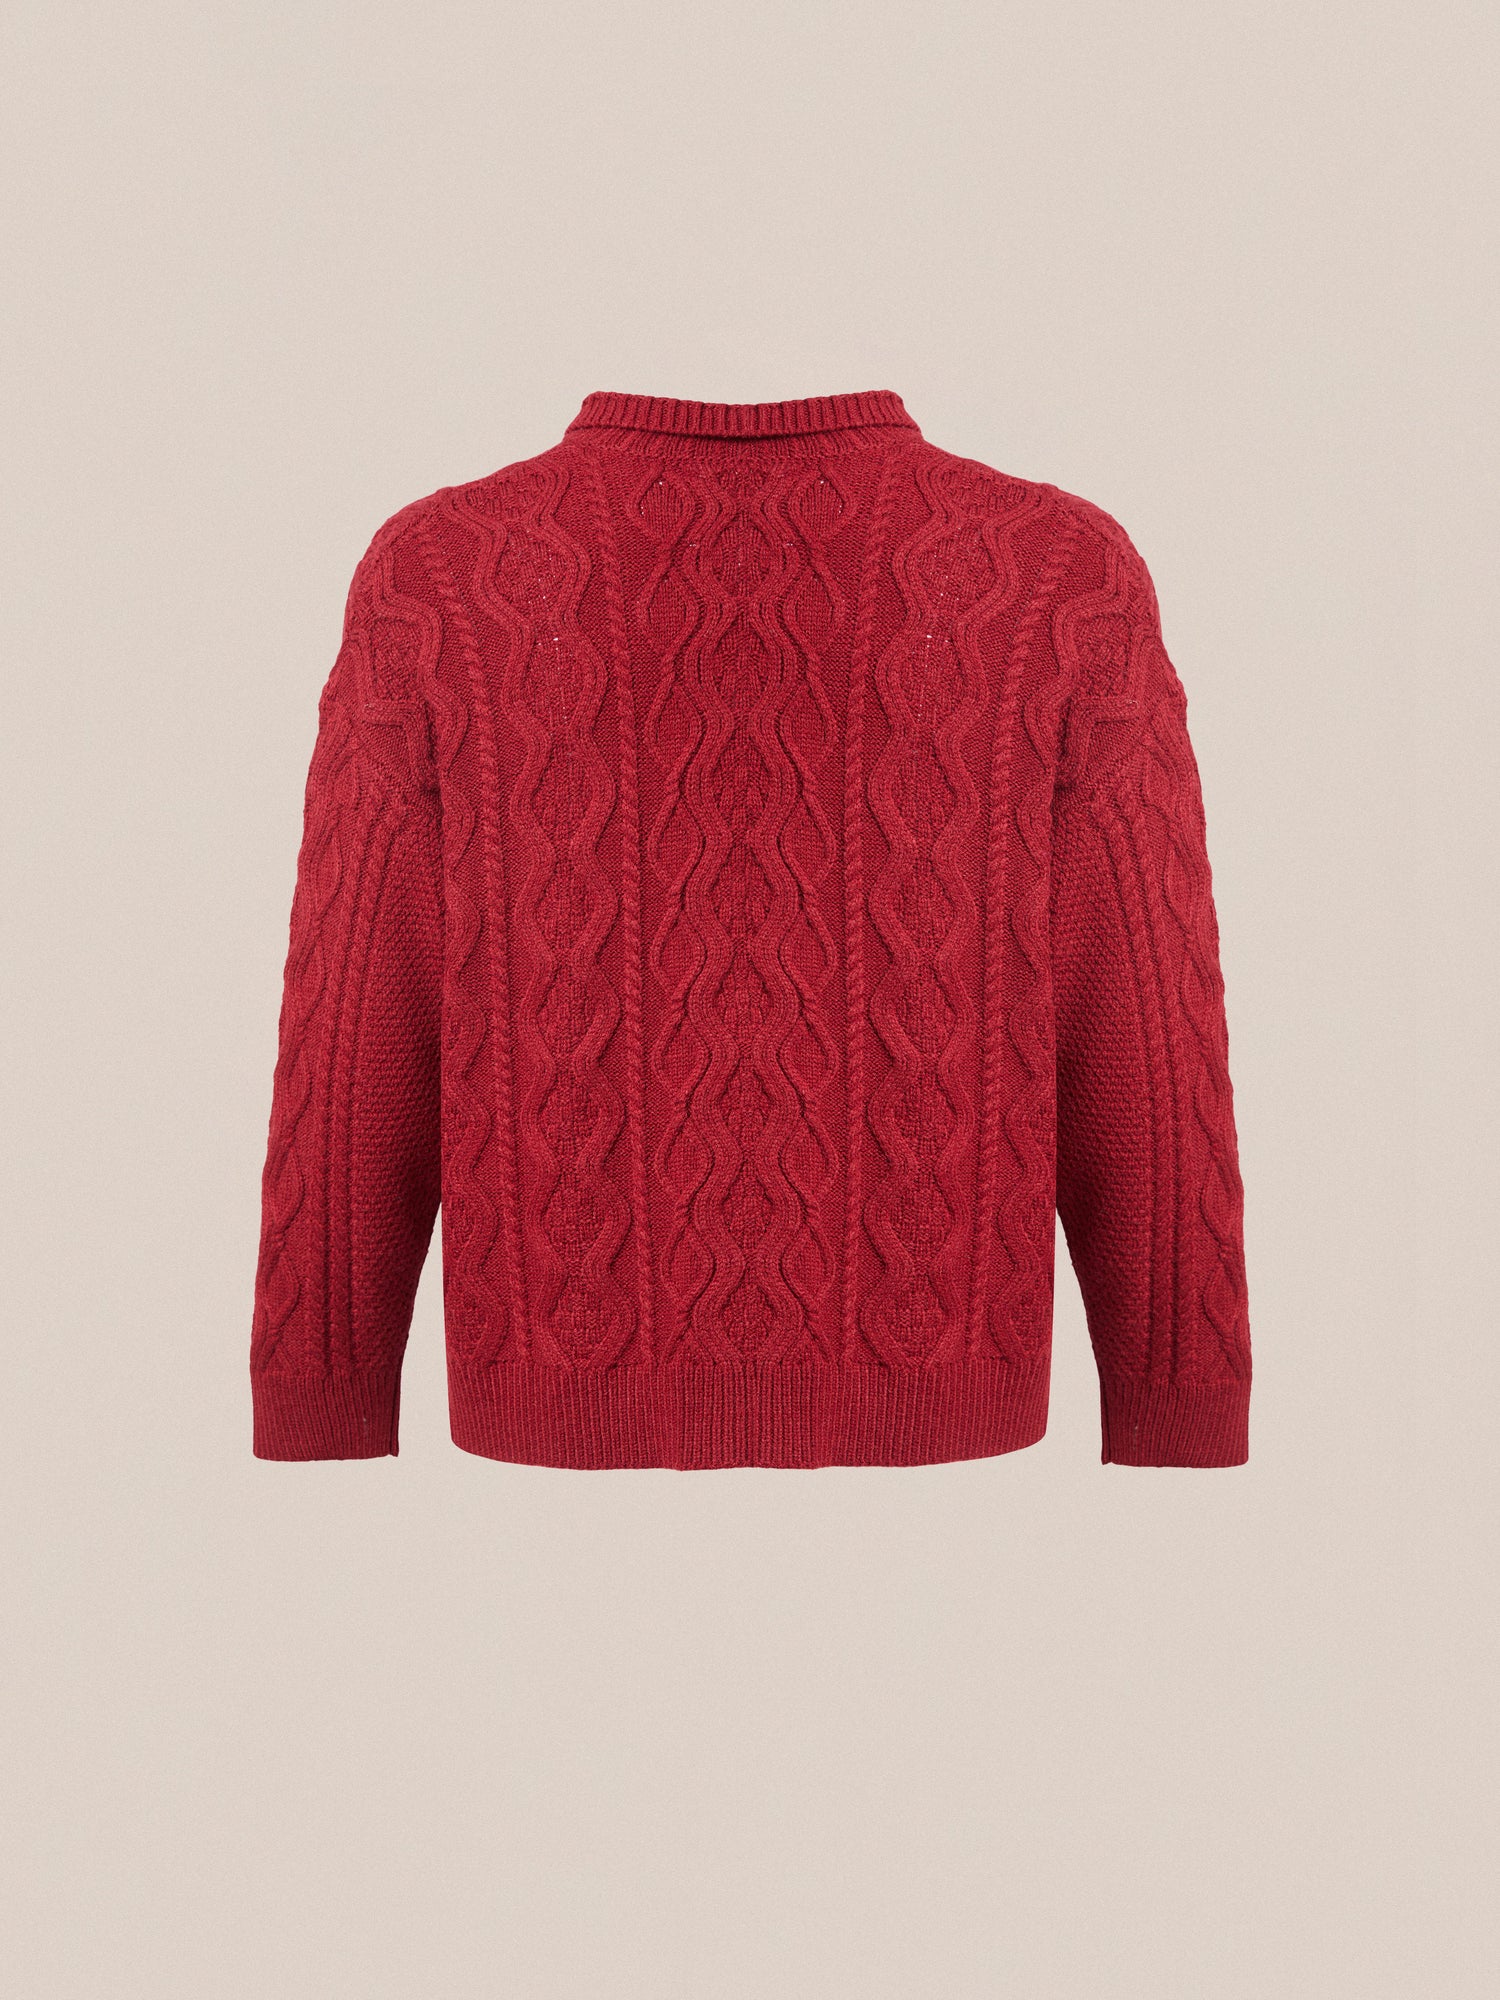 The back view of a red chunky Parsidan Cable Knit Cardigan sweater by Found.